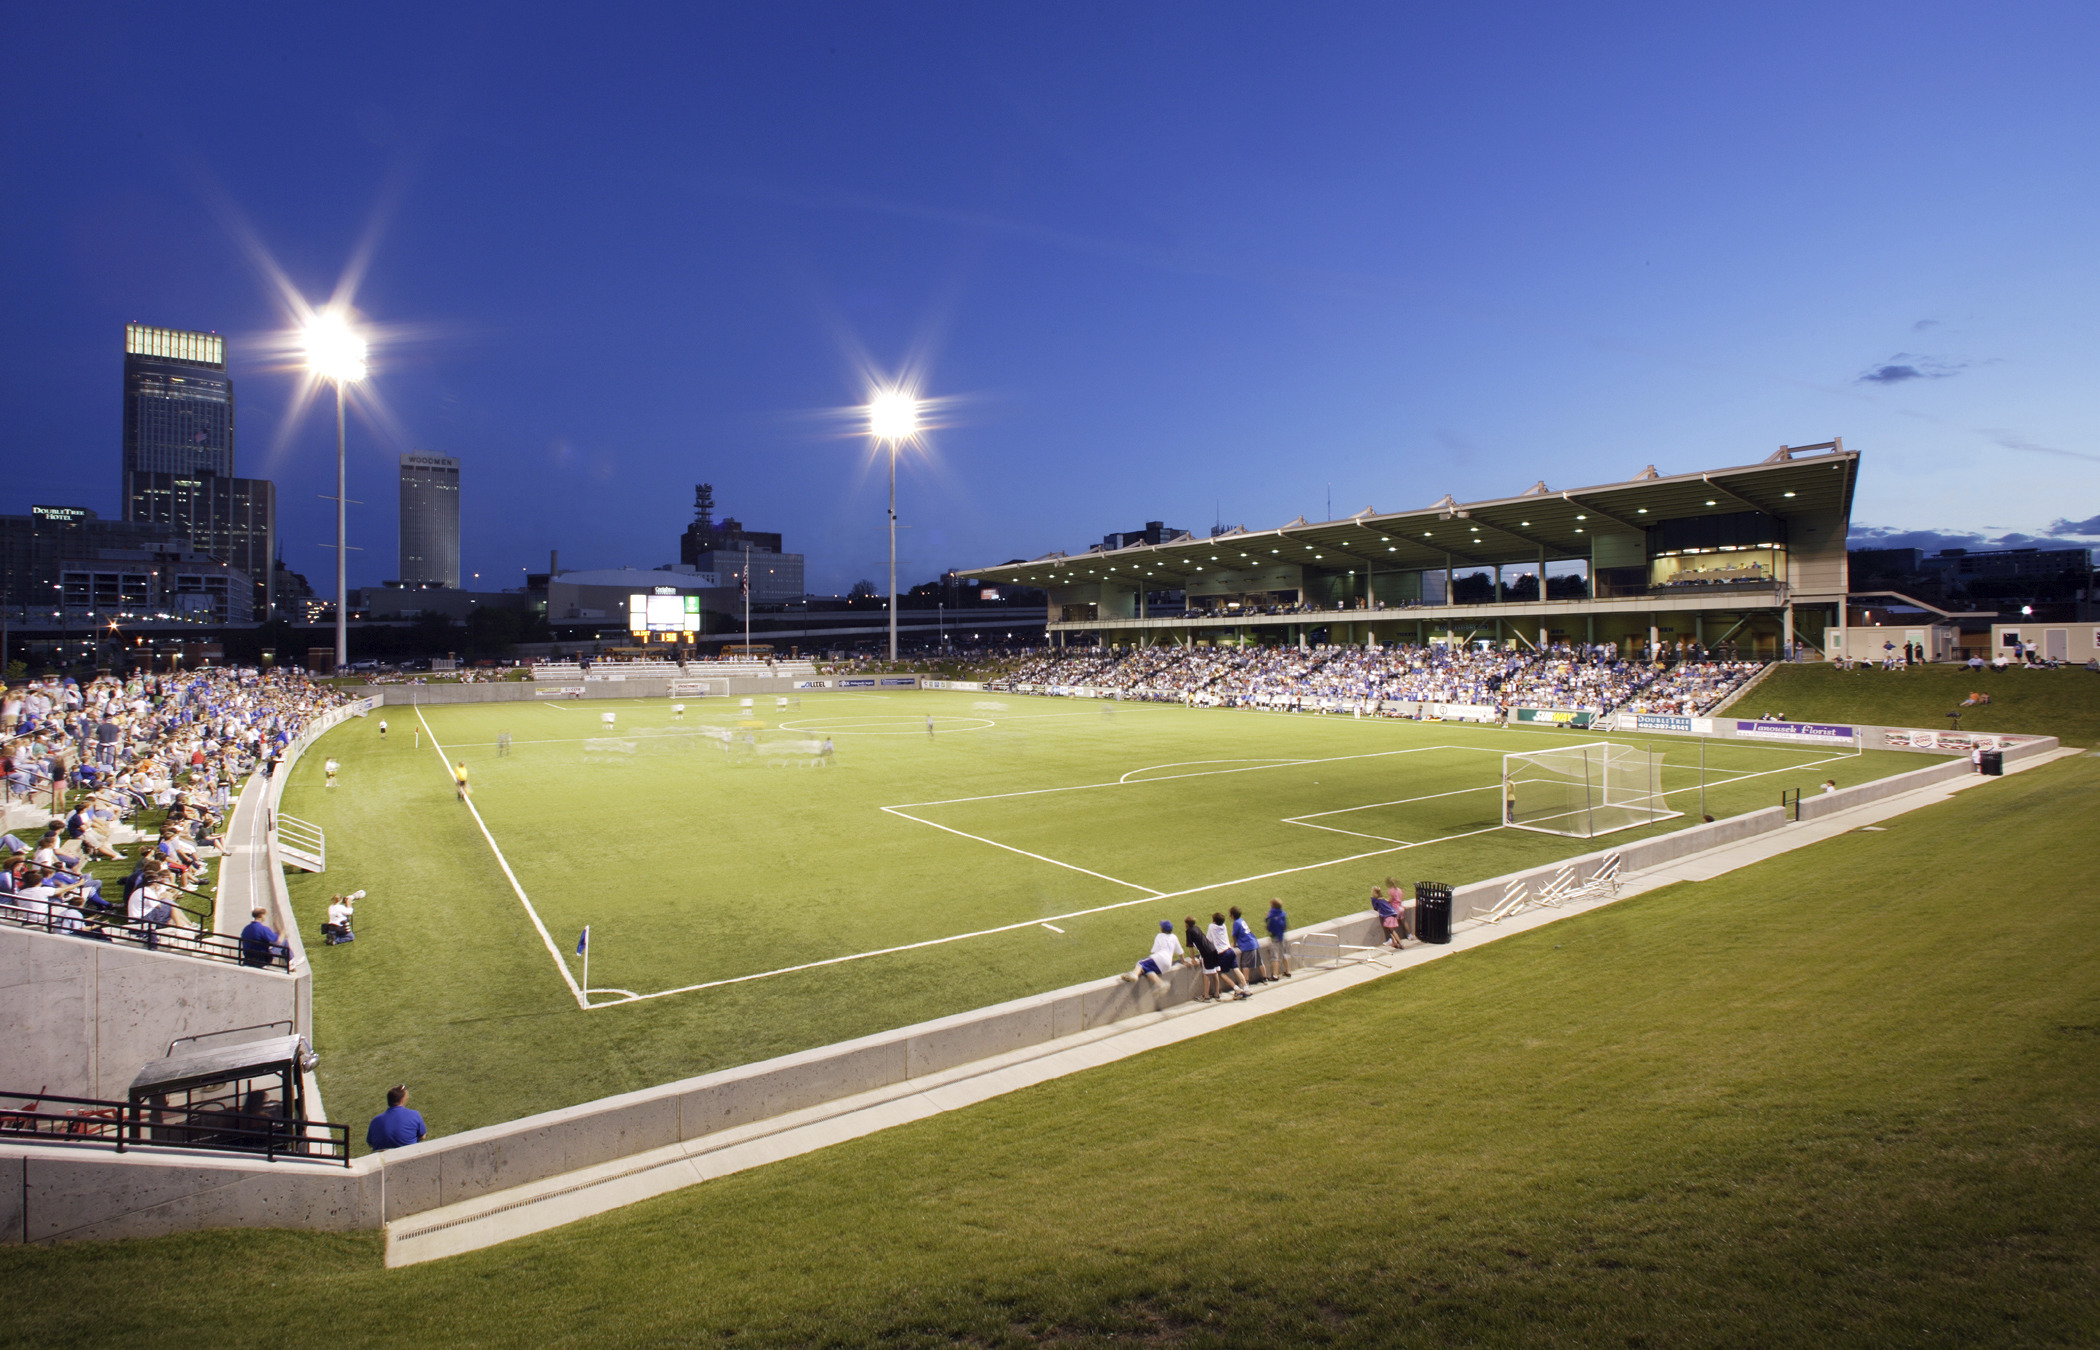 Morrison Stadium at Creighton University soccer field from grass lawn of stadium with sideline seating, illuminated at night